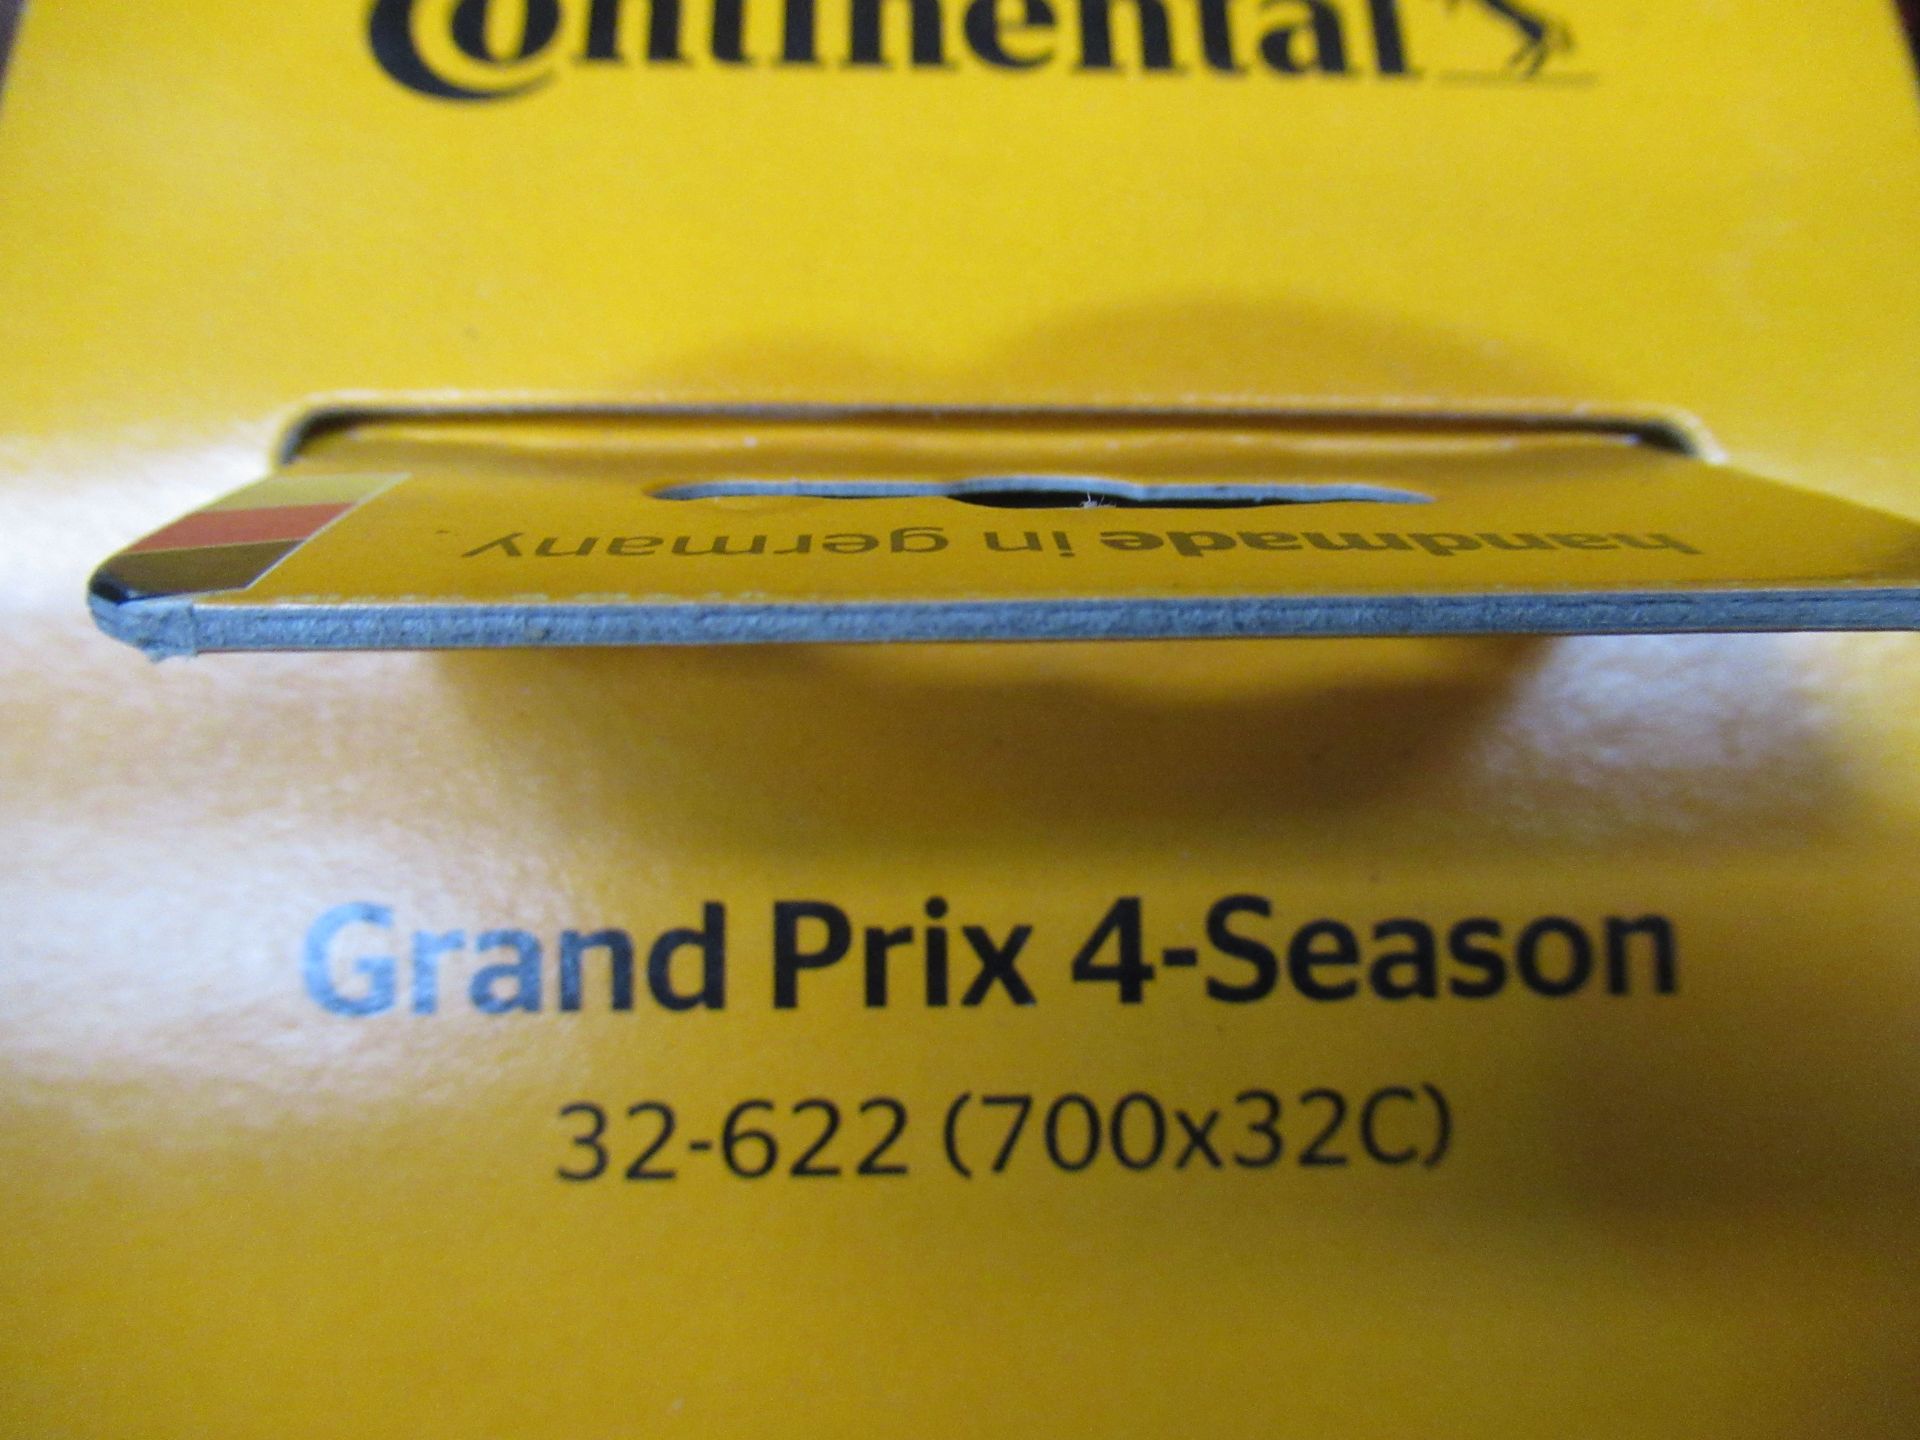 2 x Continental Grind Prix 4-season 700x32c tyres (RRP£65.95 each) - Image 3 of 3